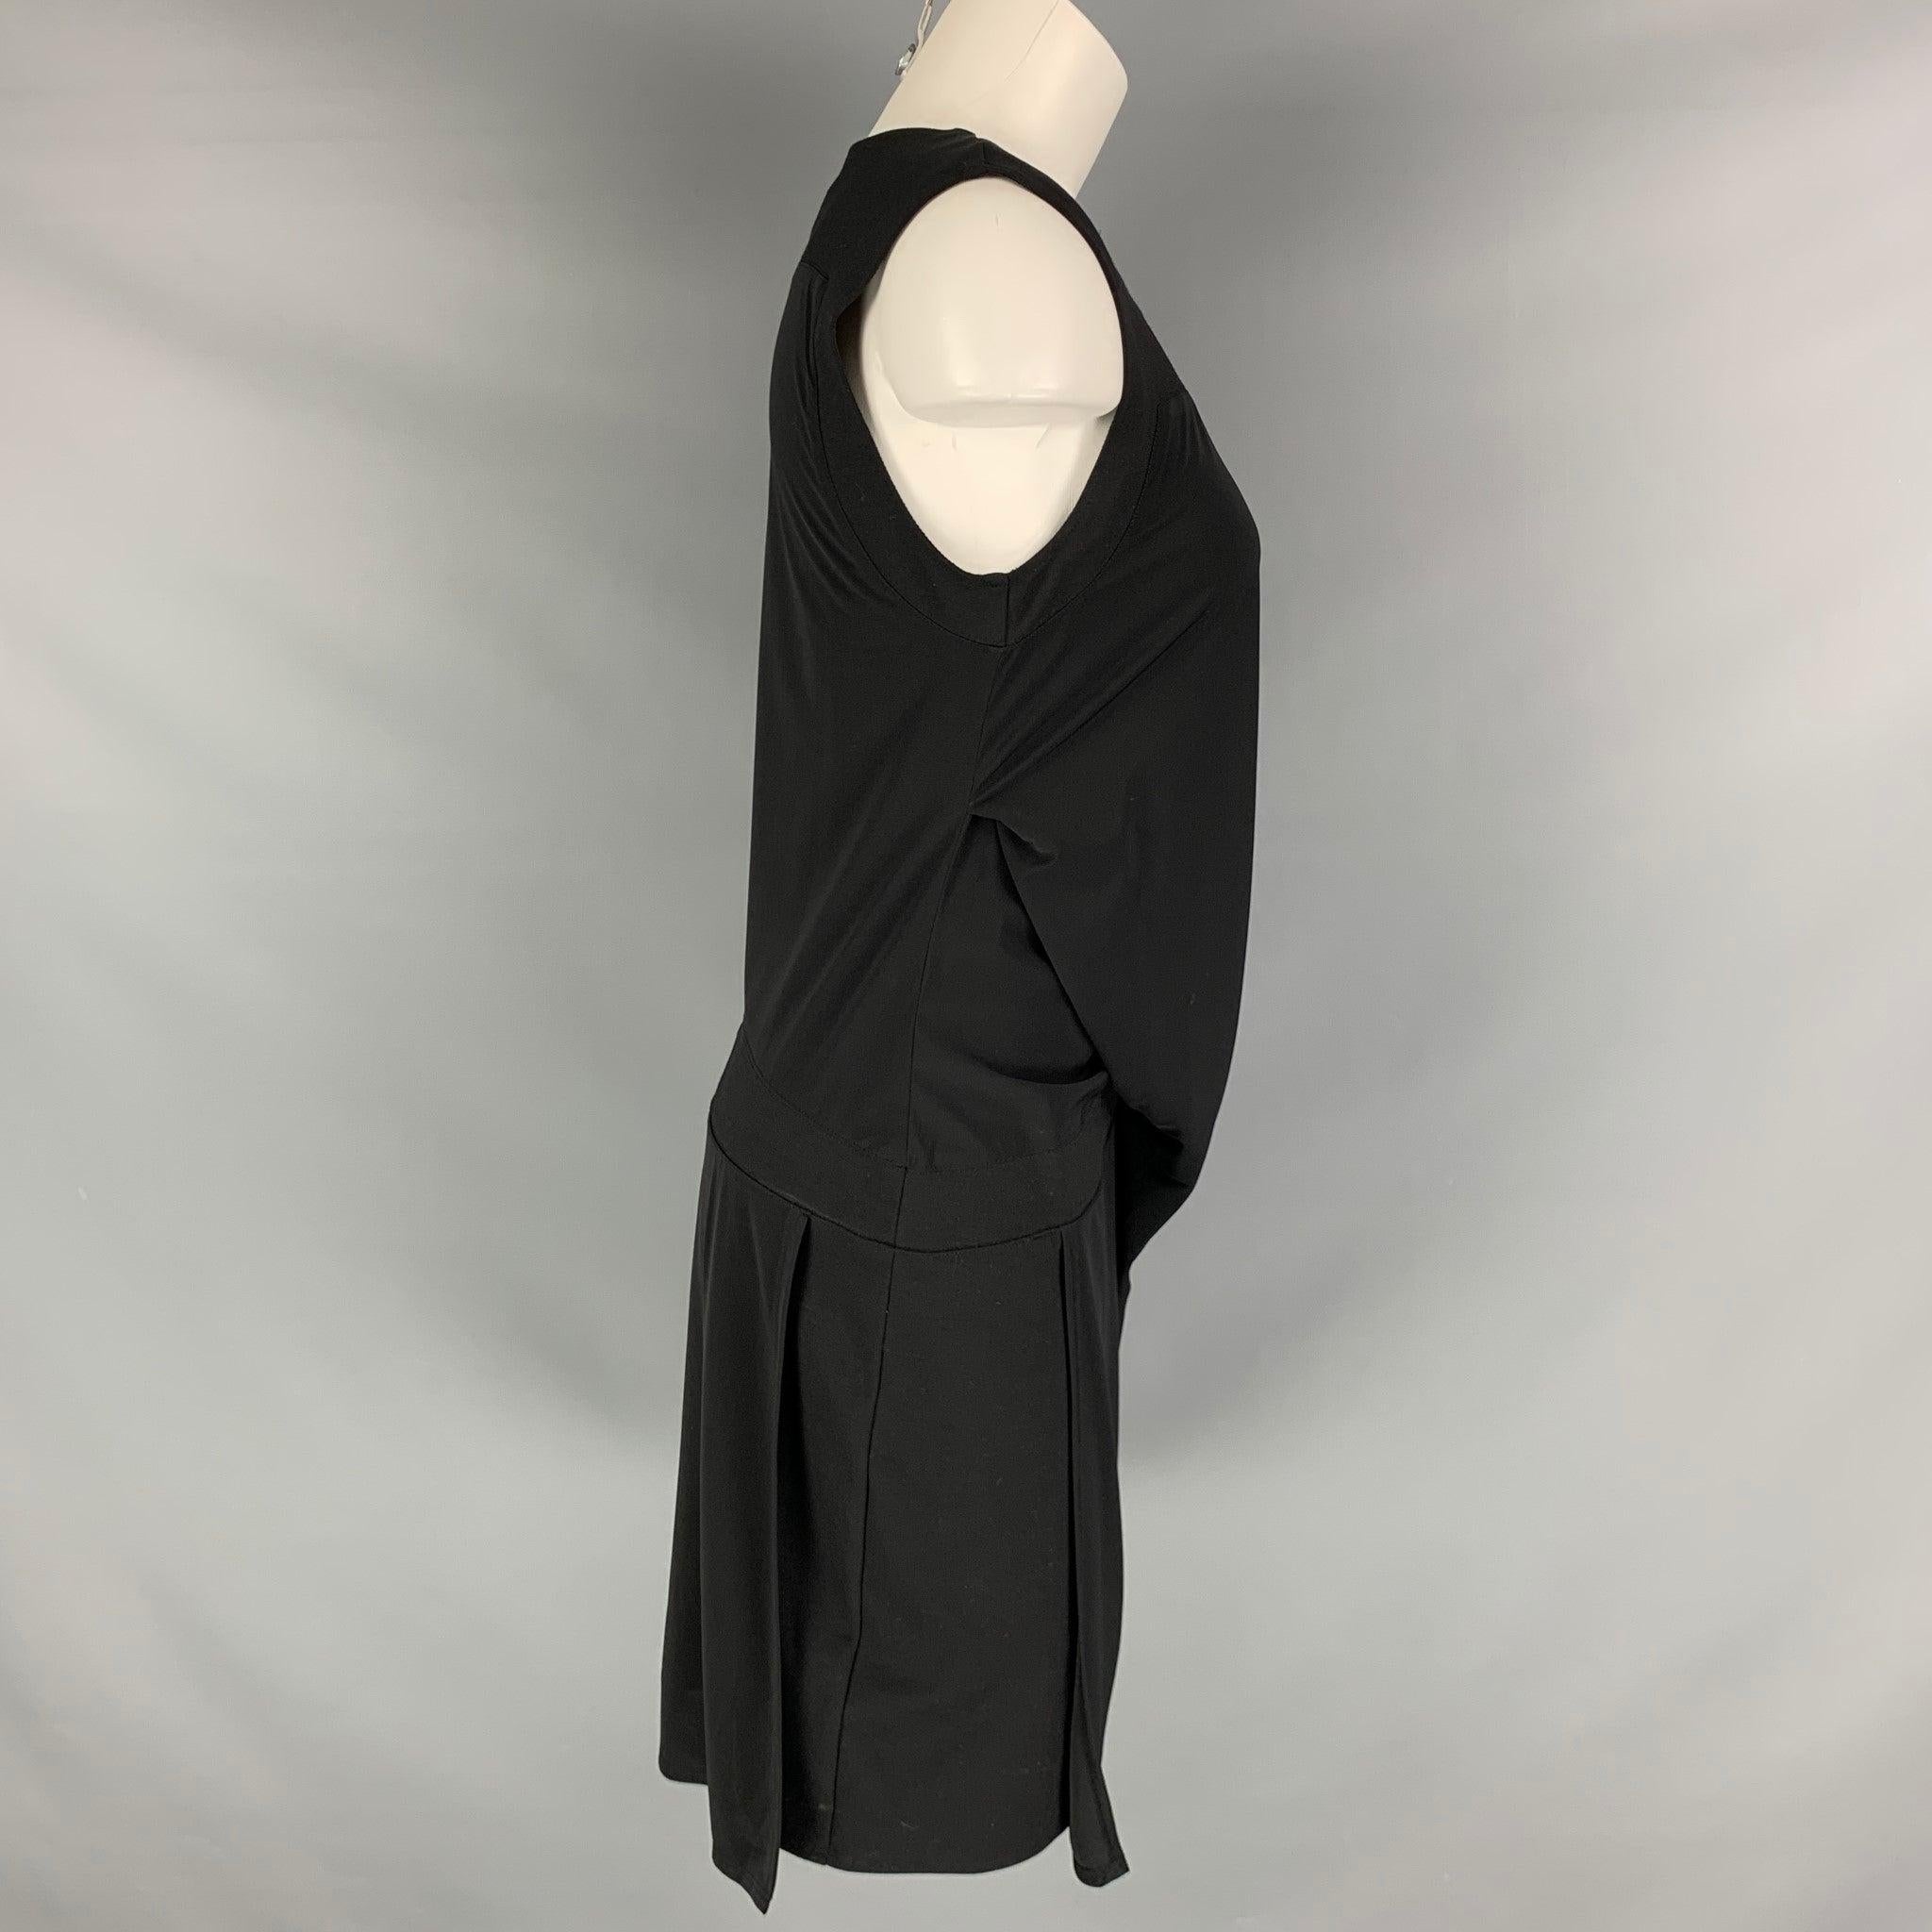 HELMUT LANG dress comes in a black polyester mixed material featuring a drape design, and sleeveless.Excellent Pre-Owned Condition. 

Marked:  M 

Measurements: 
 
Shoulder: 16.5 inches Bust: 34 inches Waist: 32 inches Hip: 34 inches Length: 35